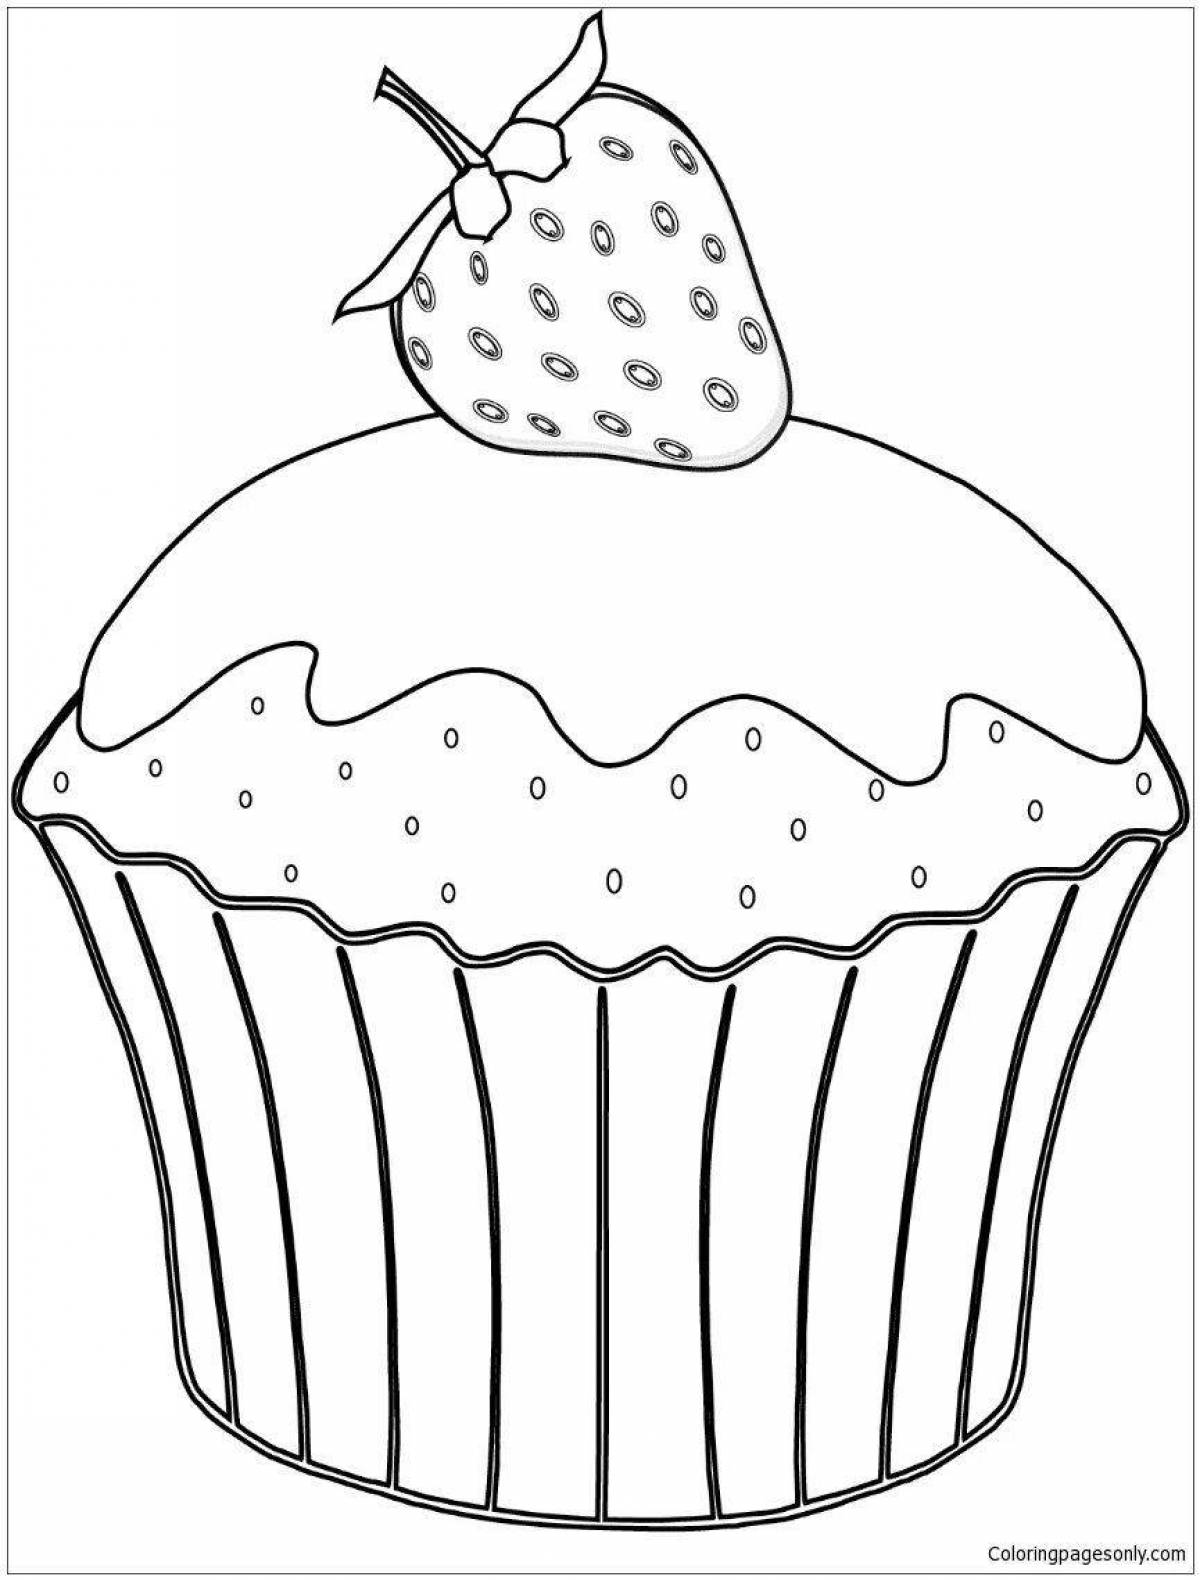 Sweet cake coloring book for kids